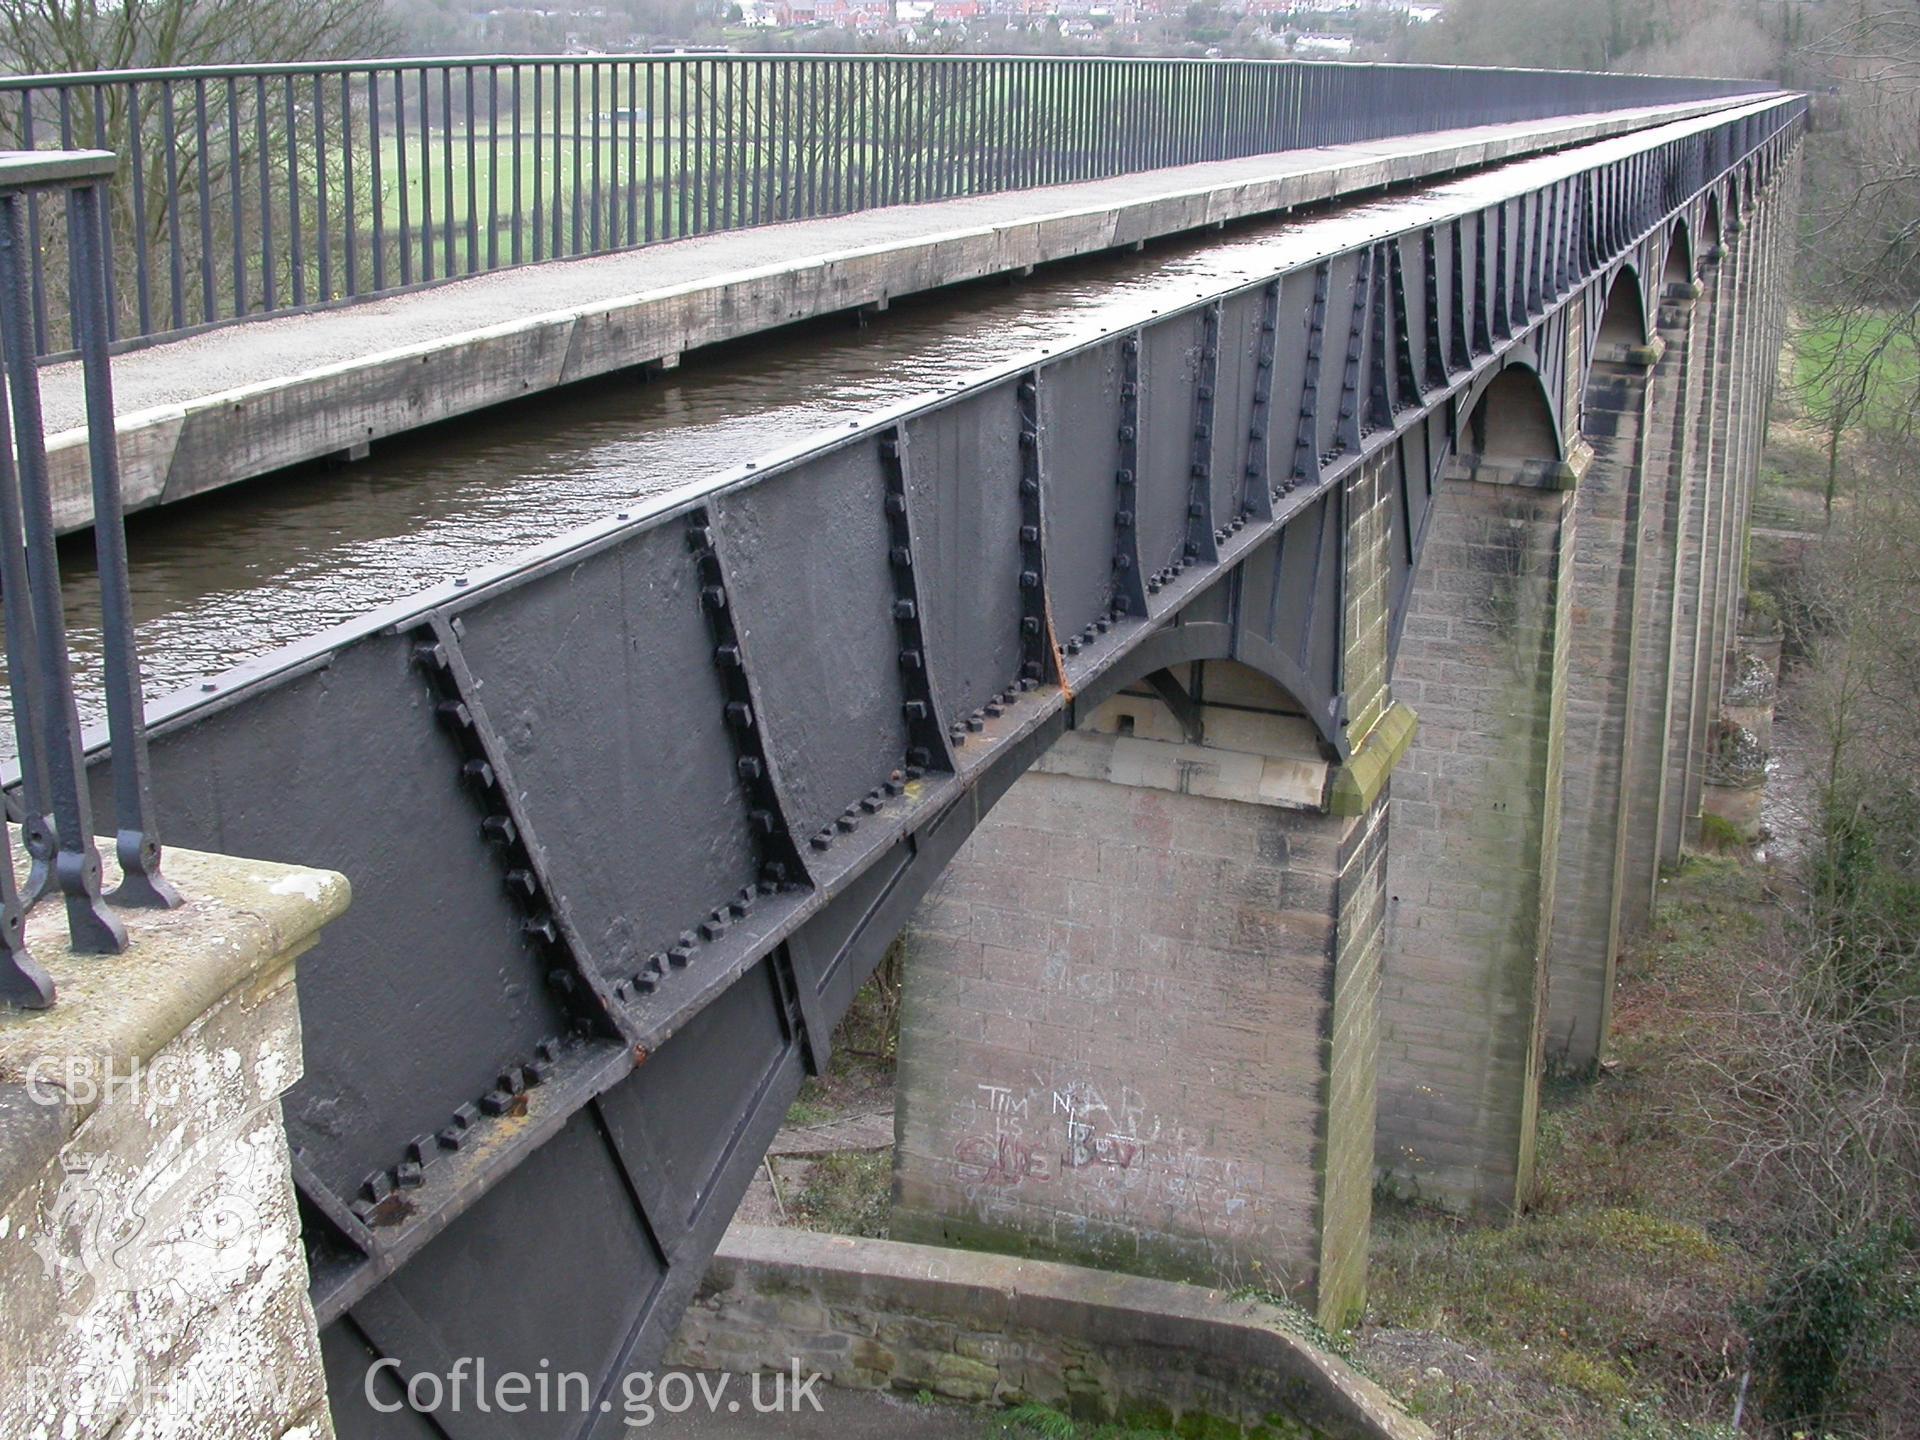 North abutment and railings and aqueduct deck from the north-west.